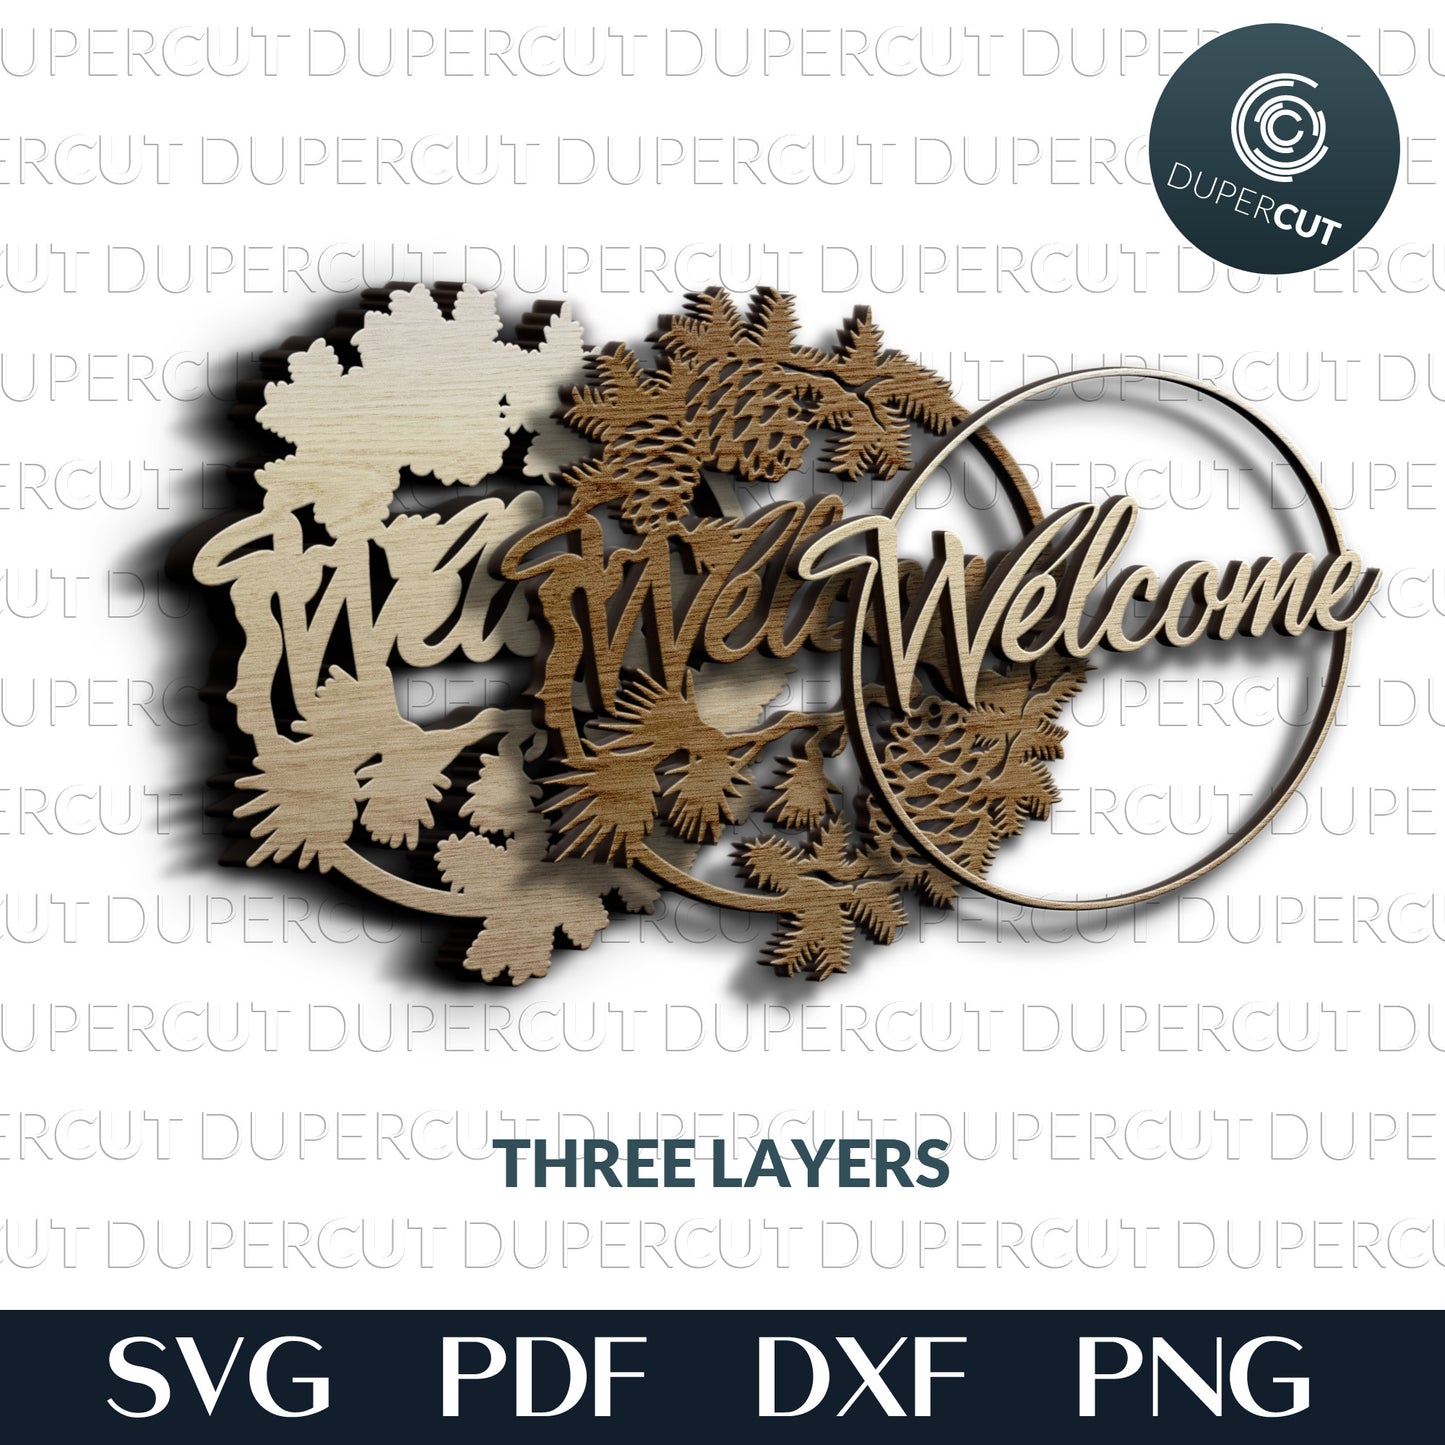 Welcome signs bundle - pinecone welcome - dual layer laser cutting files - SVG PDF DXF vector designs for Glowforge, Cricut, Silhouette Cameo, CNC plasma machines by DuperCut